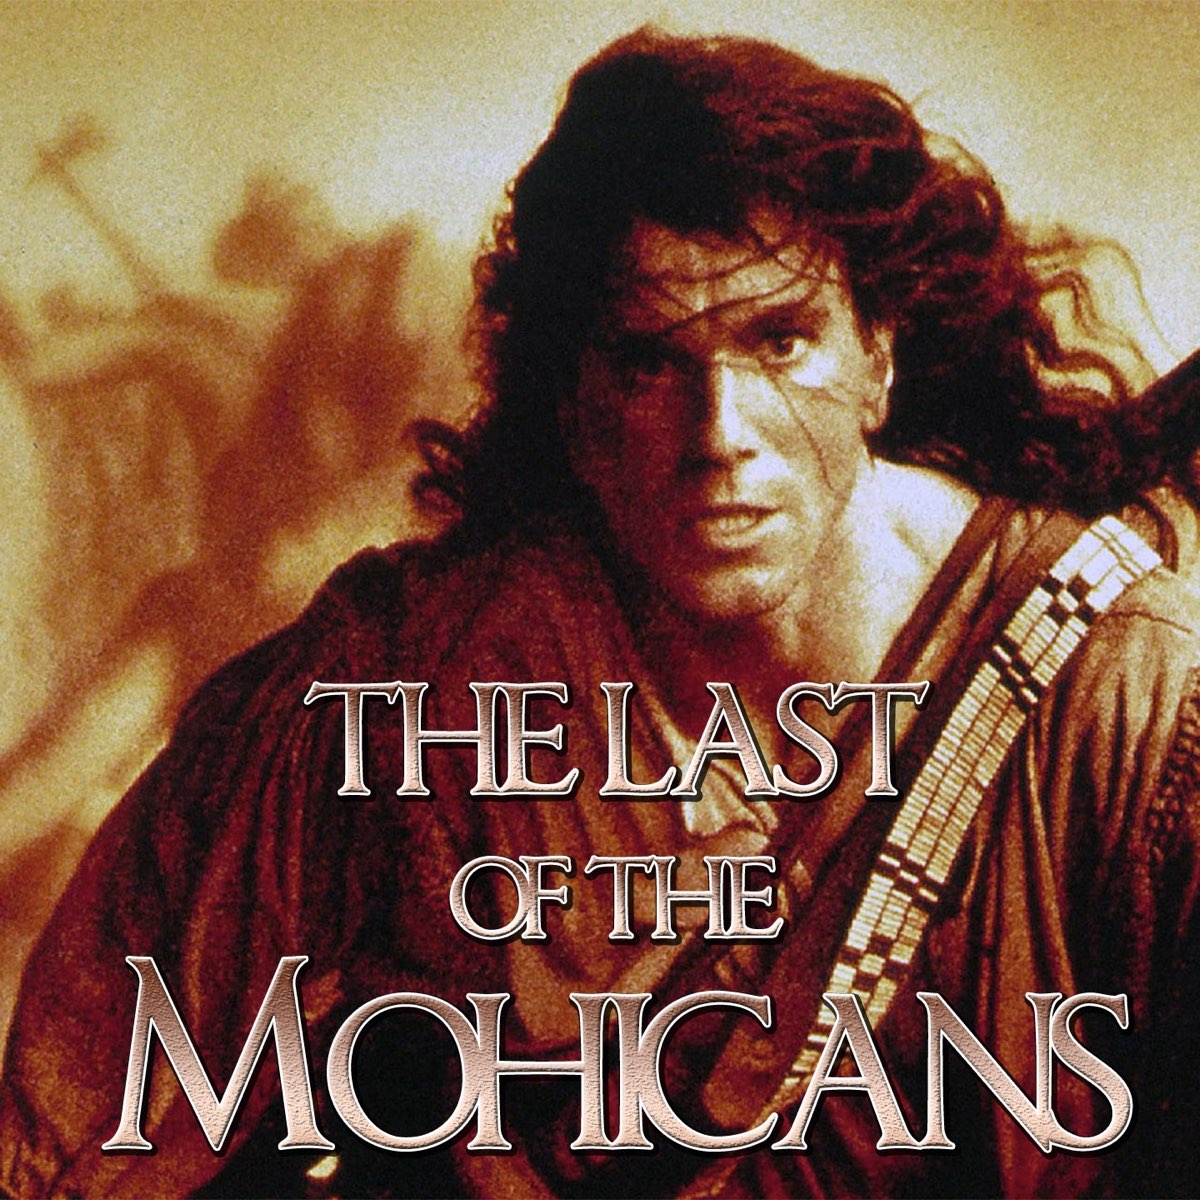 The Last of the Mohicans (Theme from "The Last of the Mohicans") - Single  by Hanny Williams on Apple Music